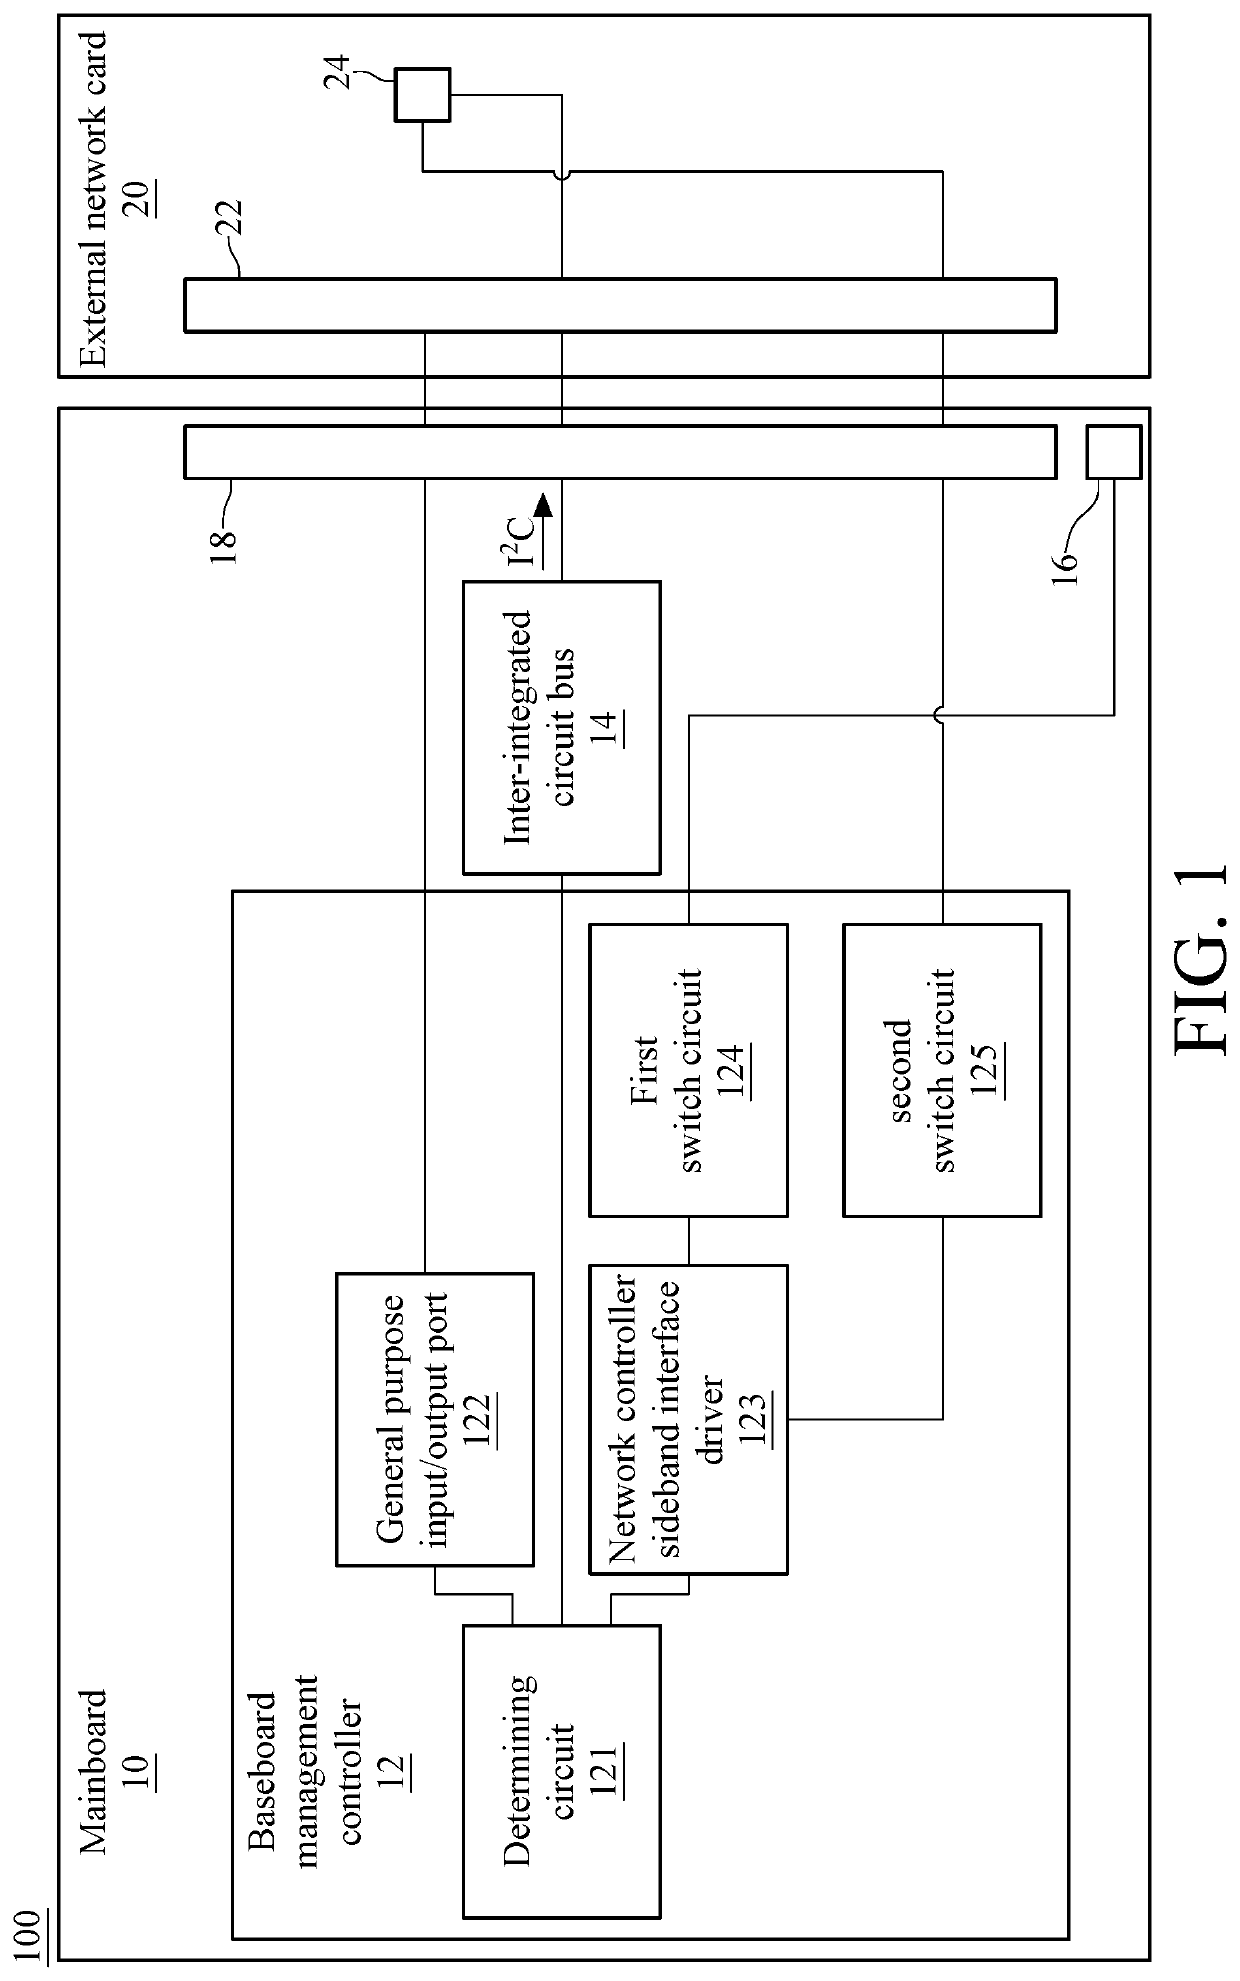 Baseboard management controller switching method for sharing network protocol